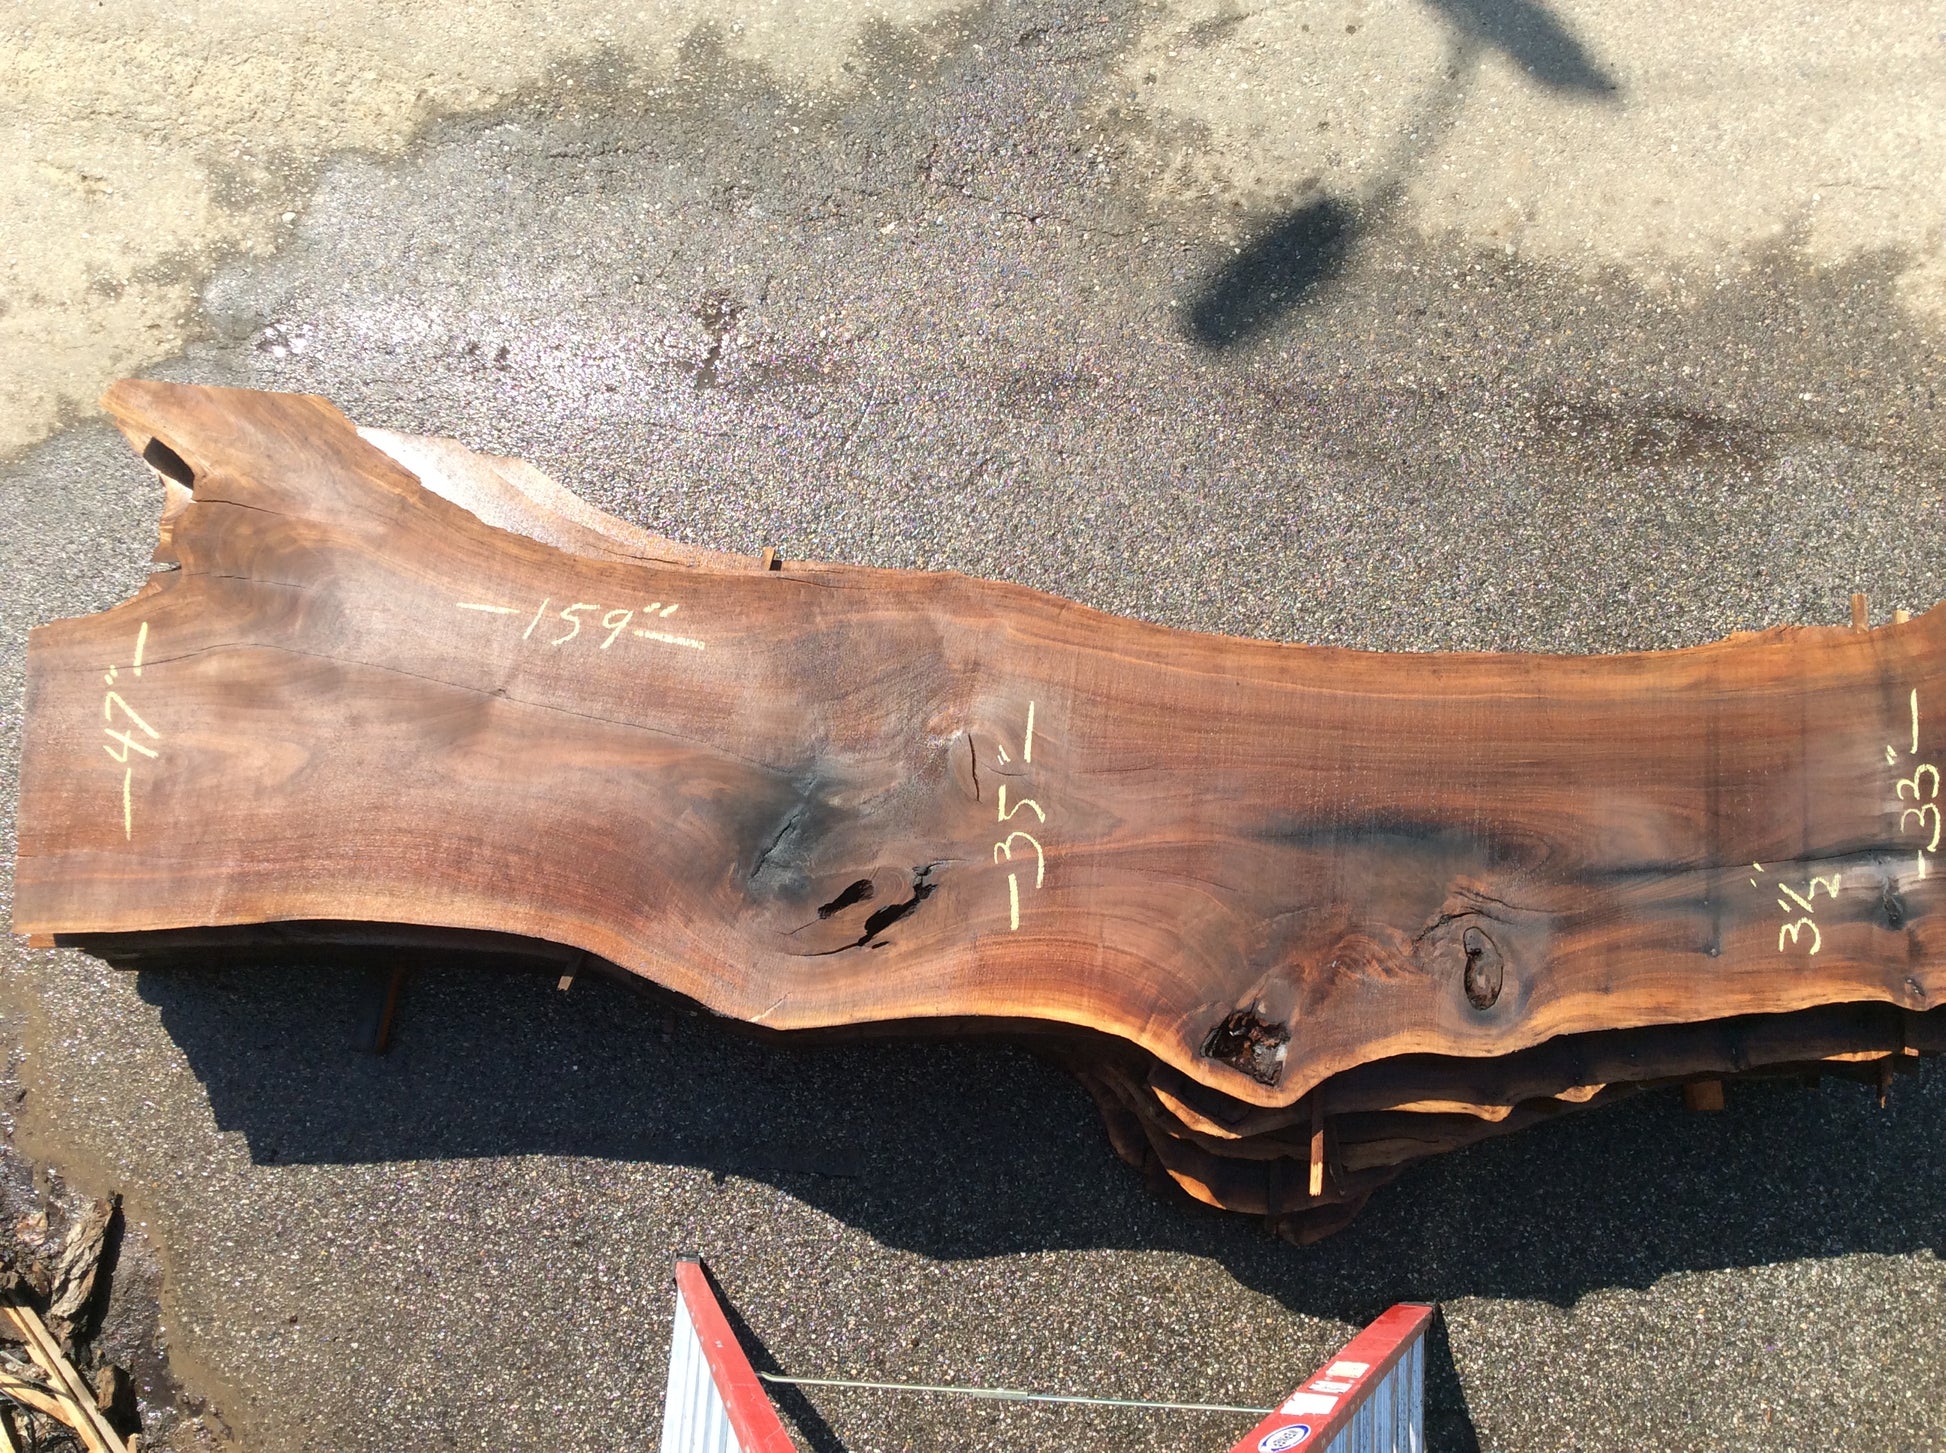 Claro Walnut, Large knot inclusions iron staining